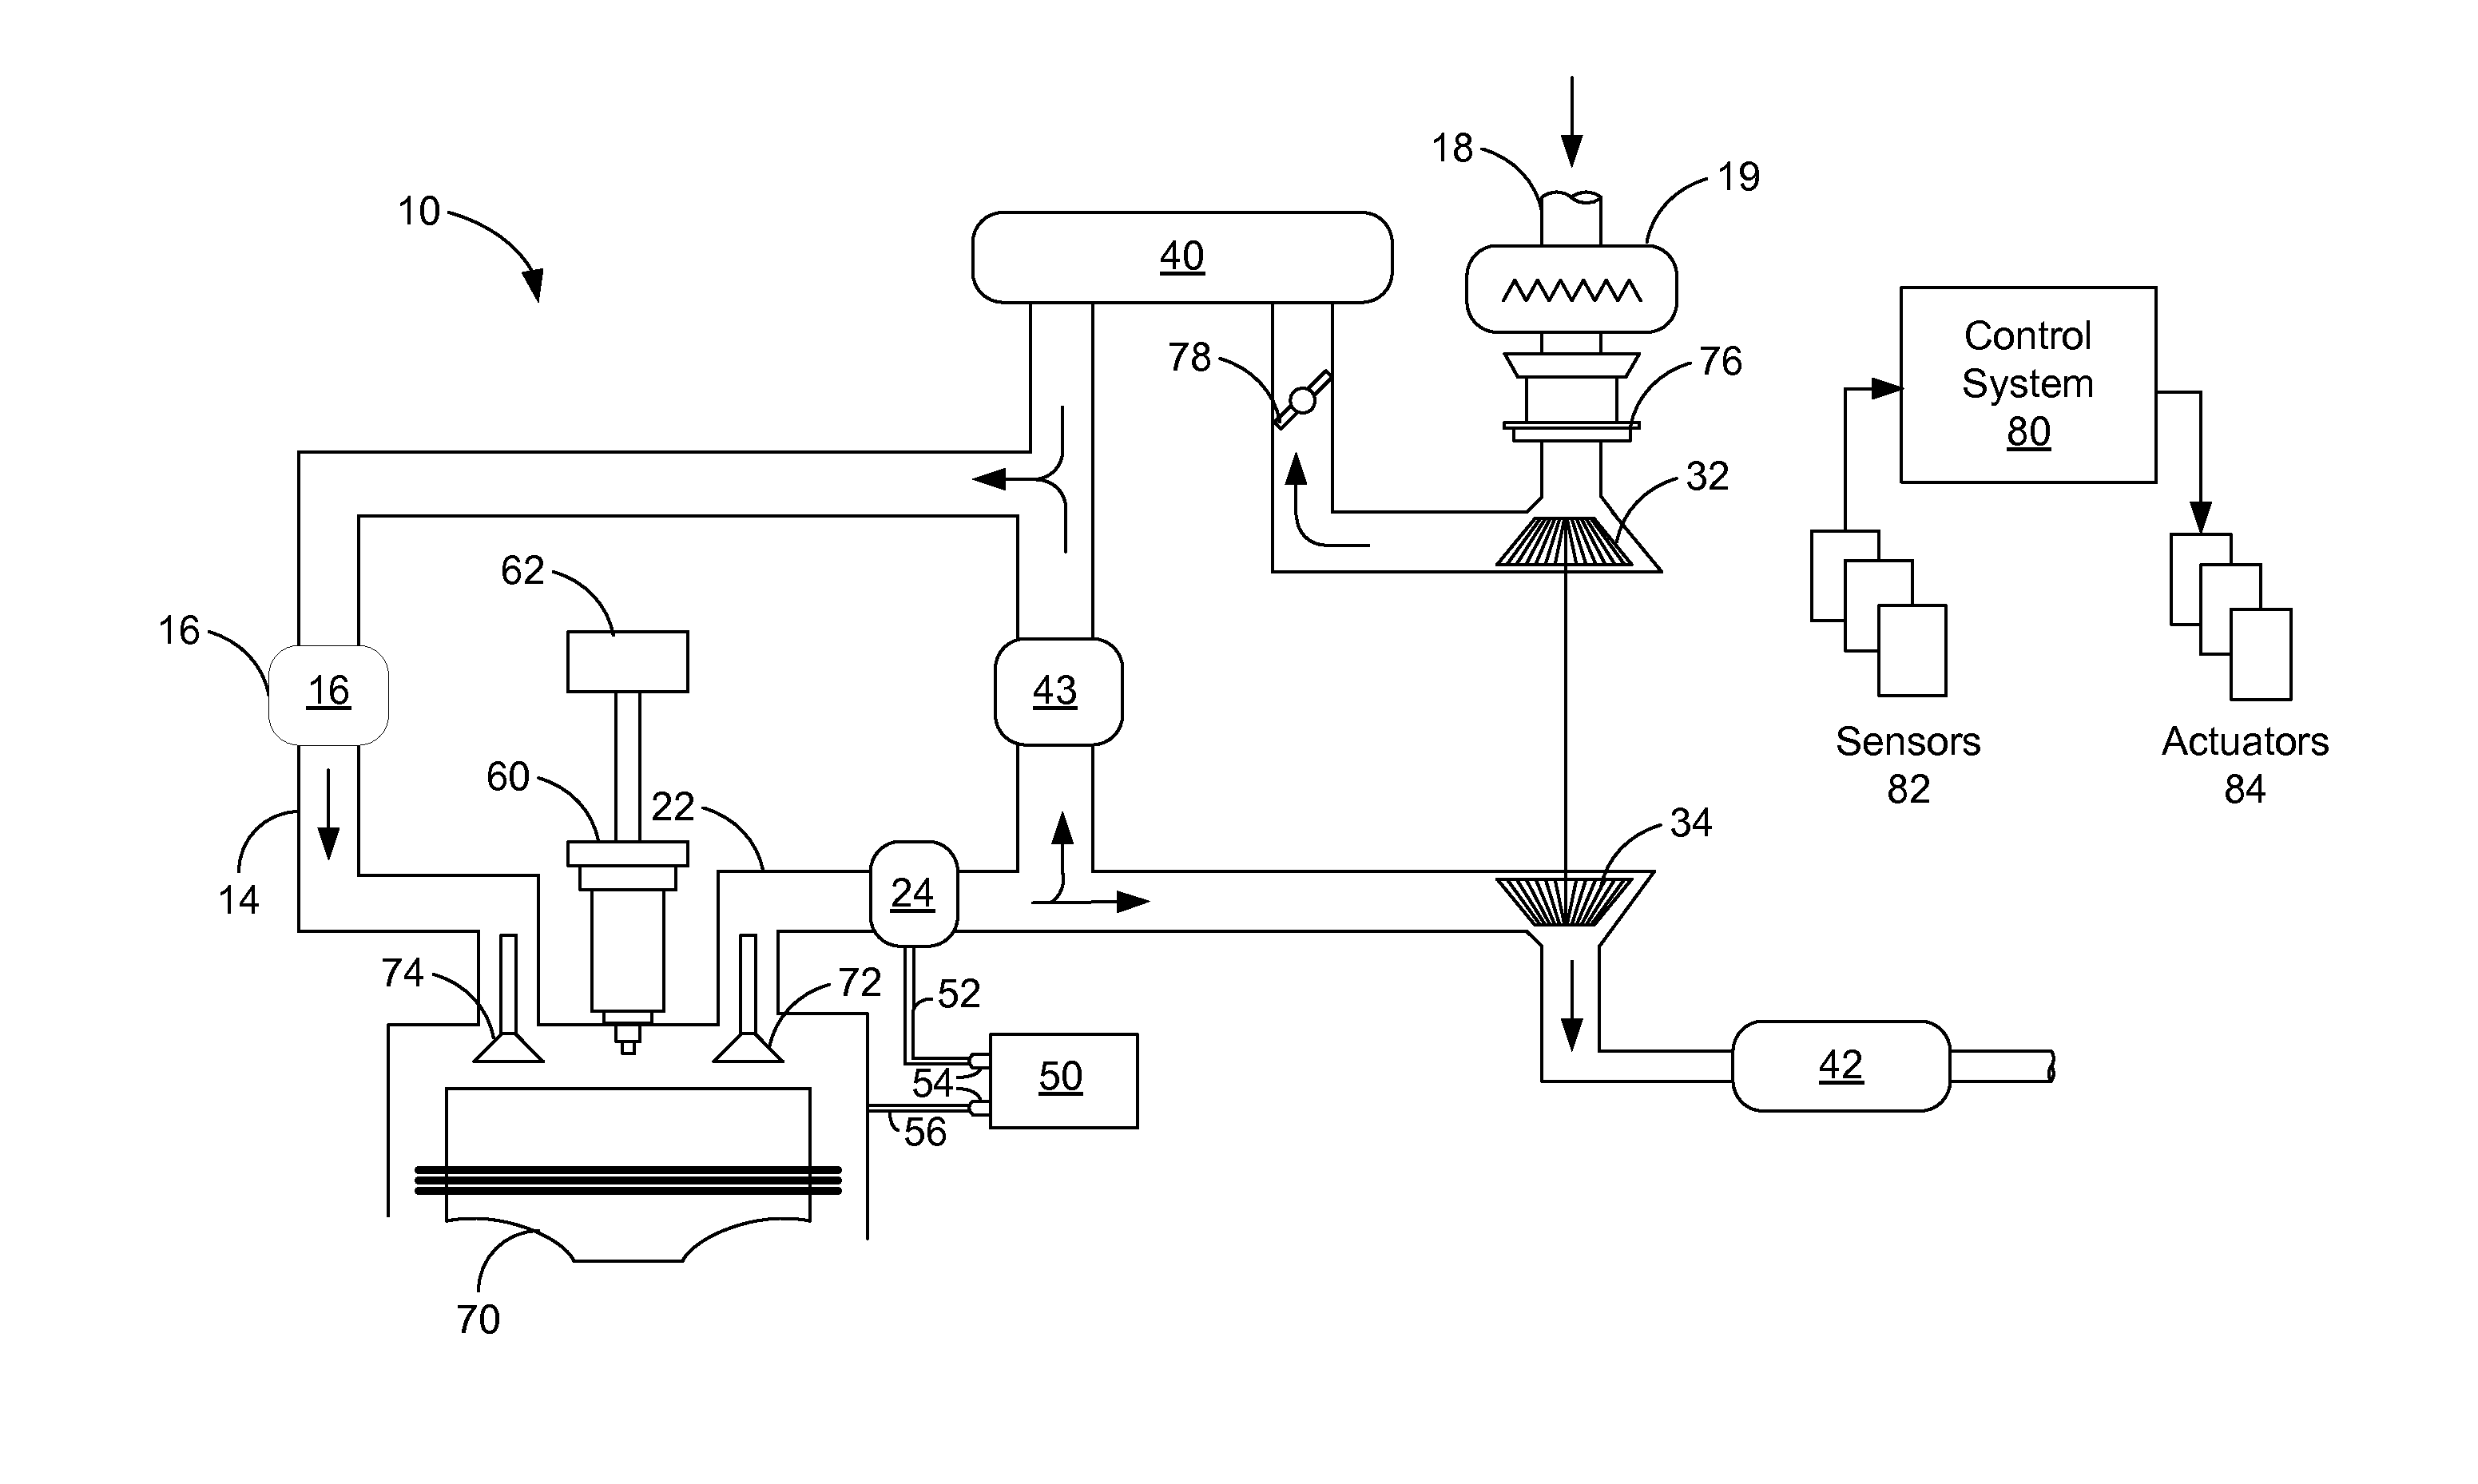 Method and apparatus for injecting hydrogen within an engine